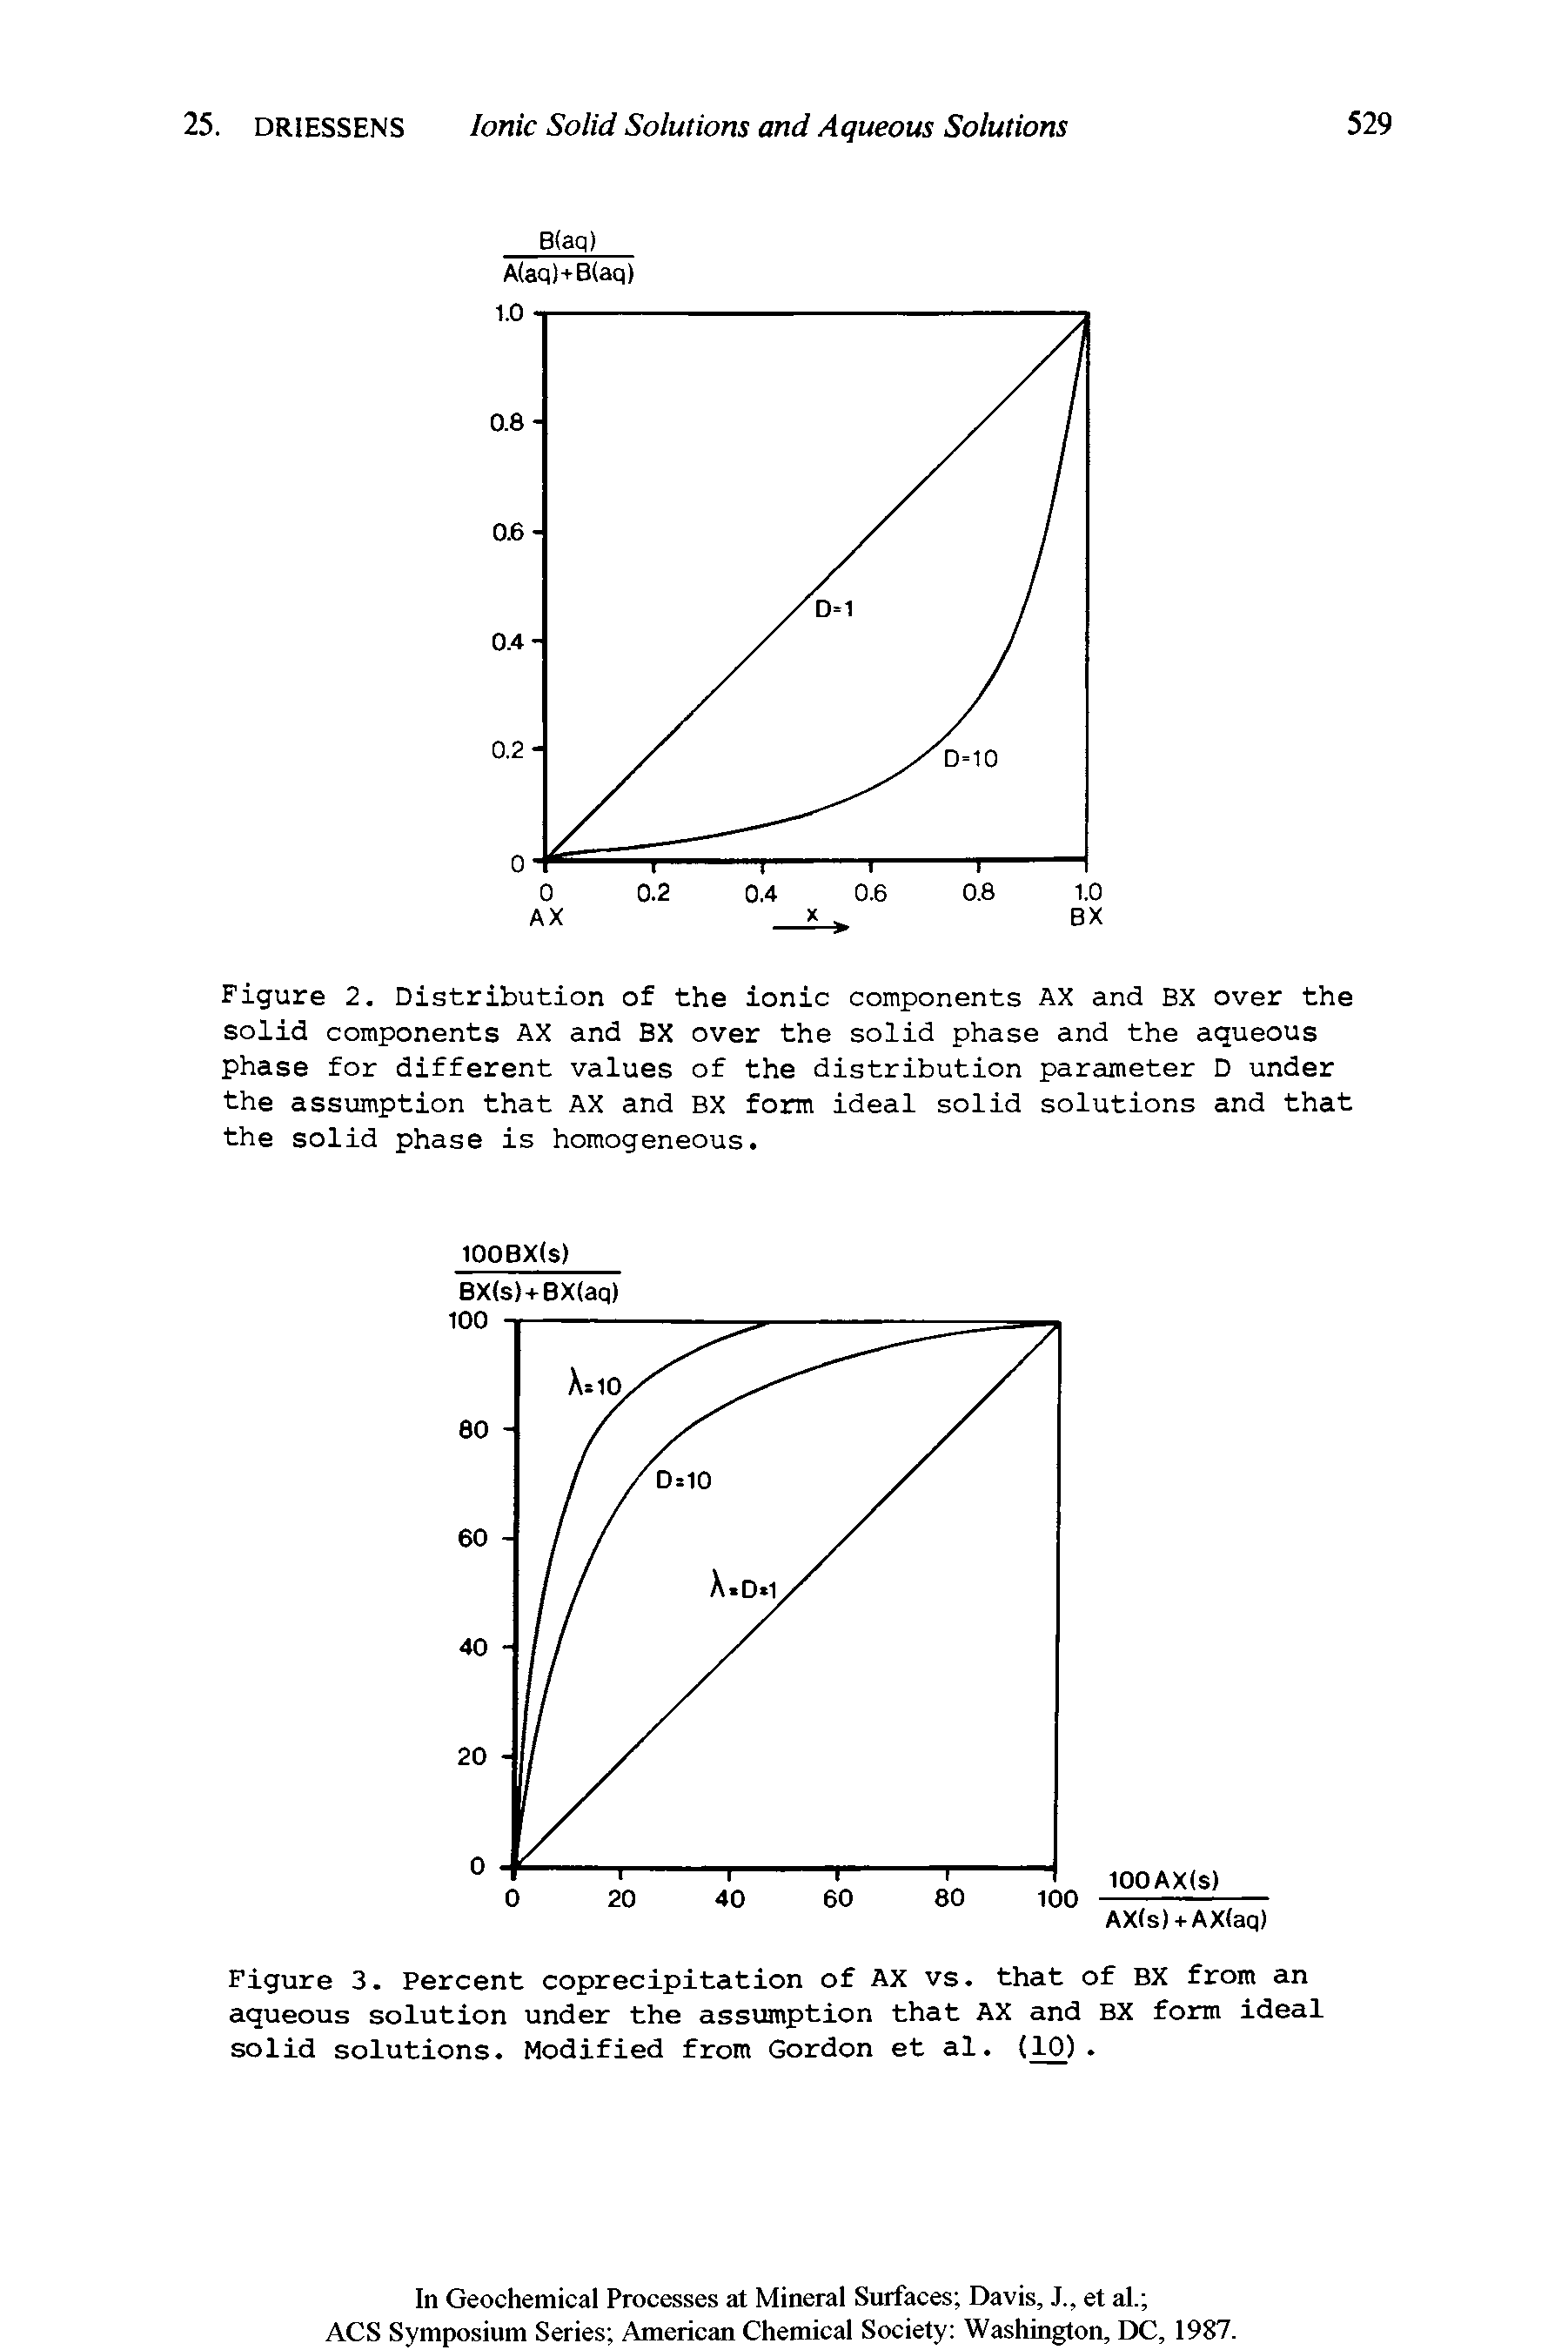 Figure 2. Distribution of the ionic components AX and BX over the solid components AX and BX over the solid phase and the aqueous phase for different values of the distribution parameter D under the assumption that AX and BX form ideal solid solutions and that the solid phase is homogeneous.